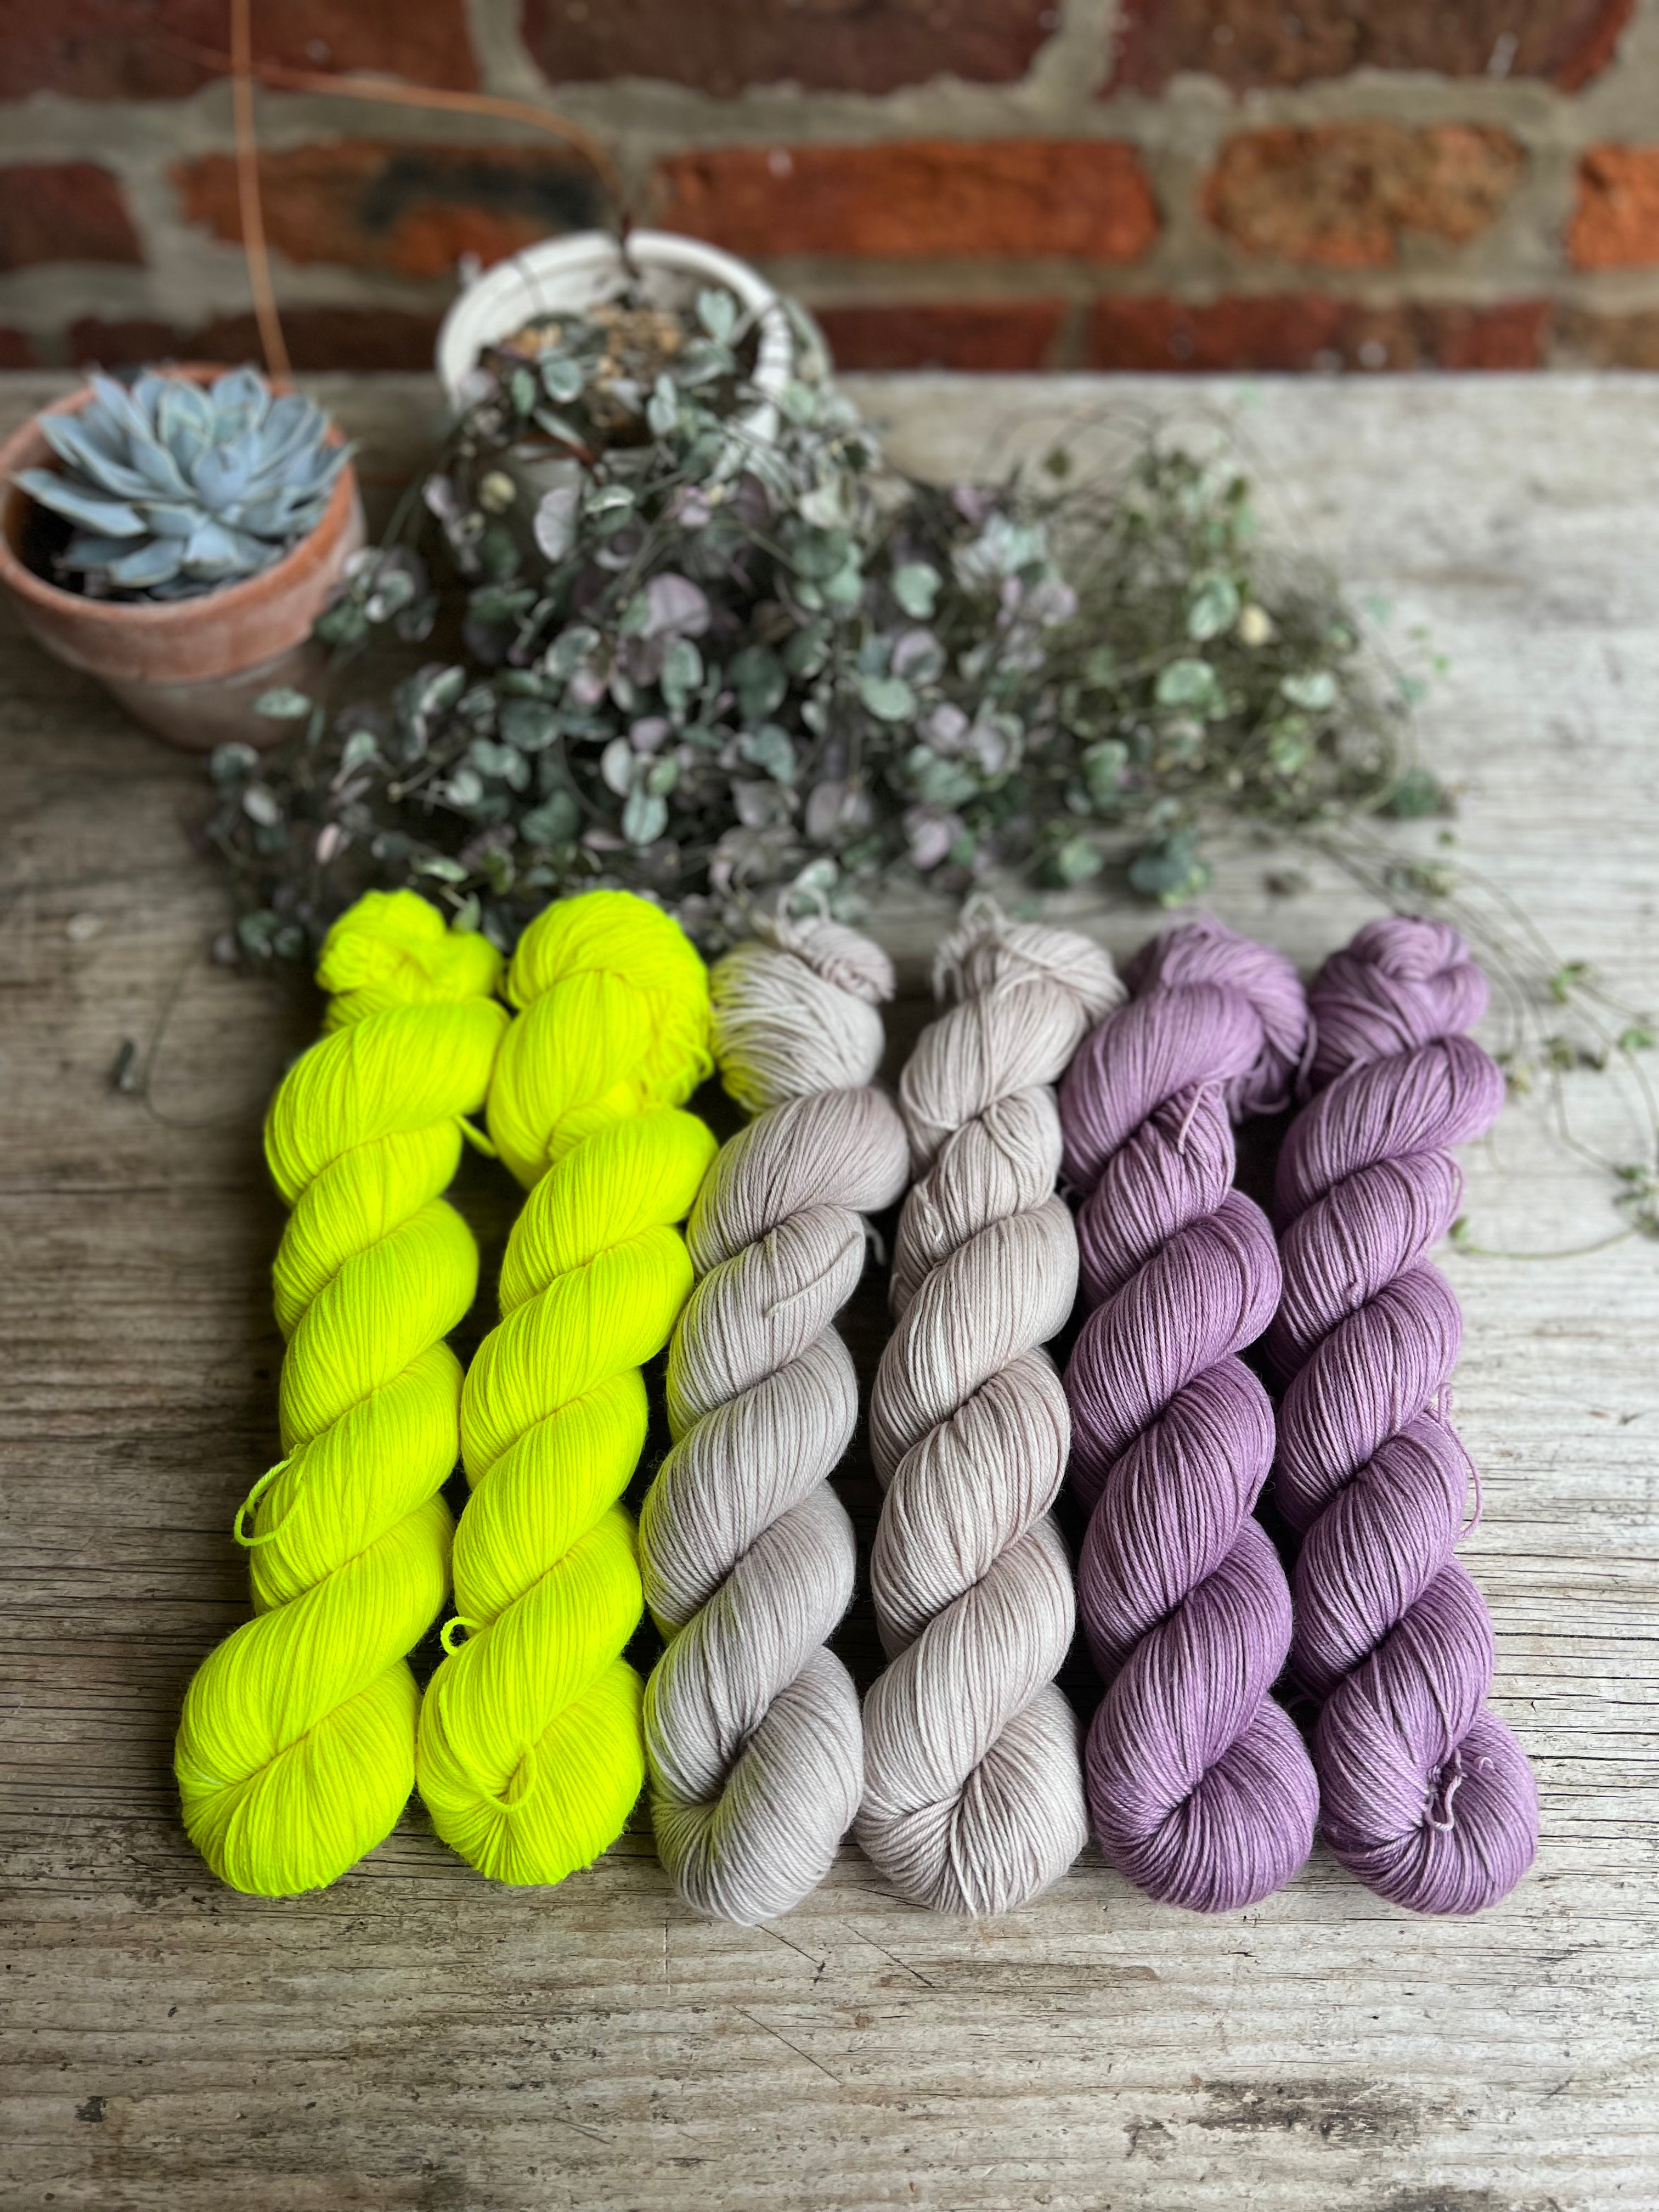 Dyed to order - Shifting Shevrons Shawl kit by Stephen West